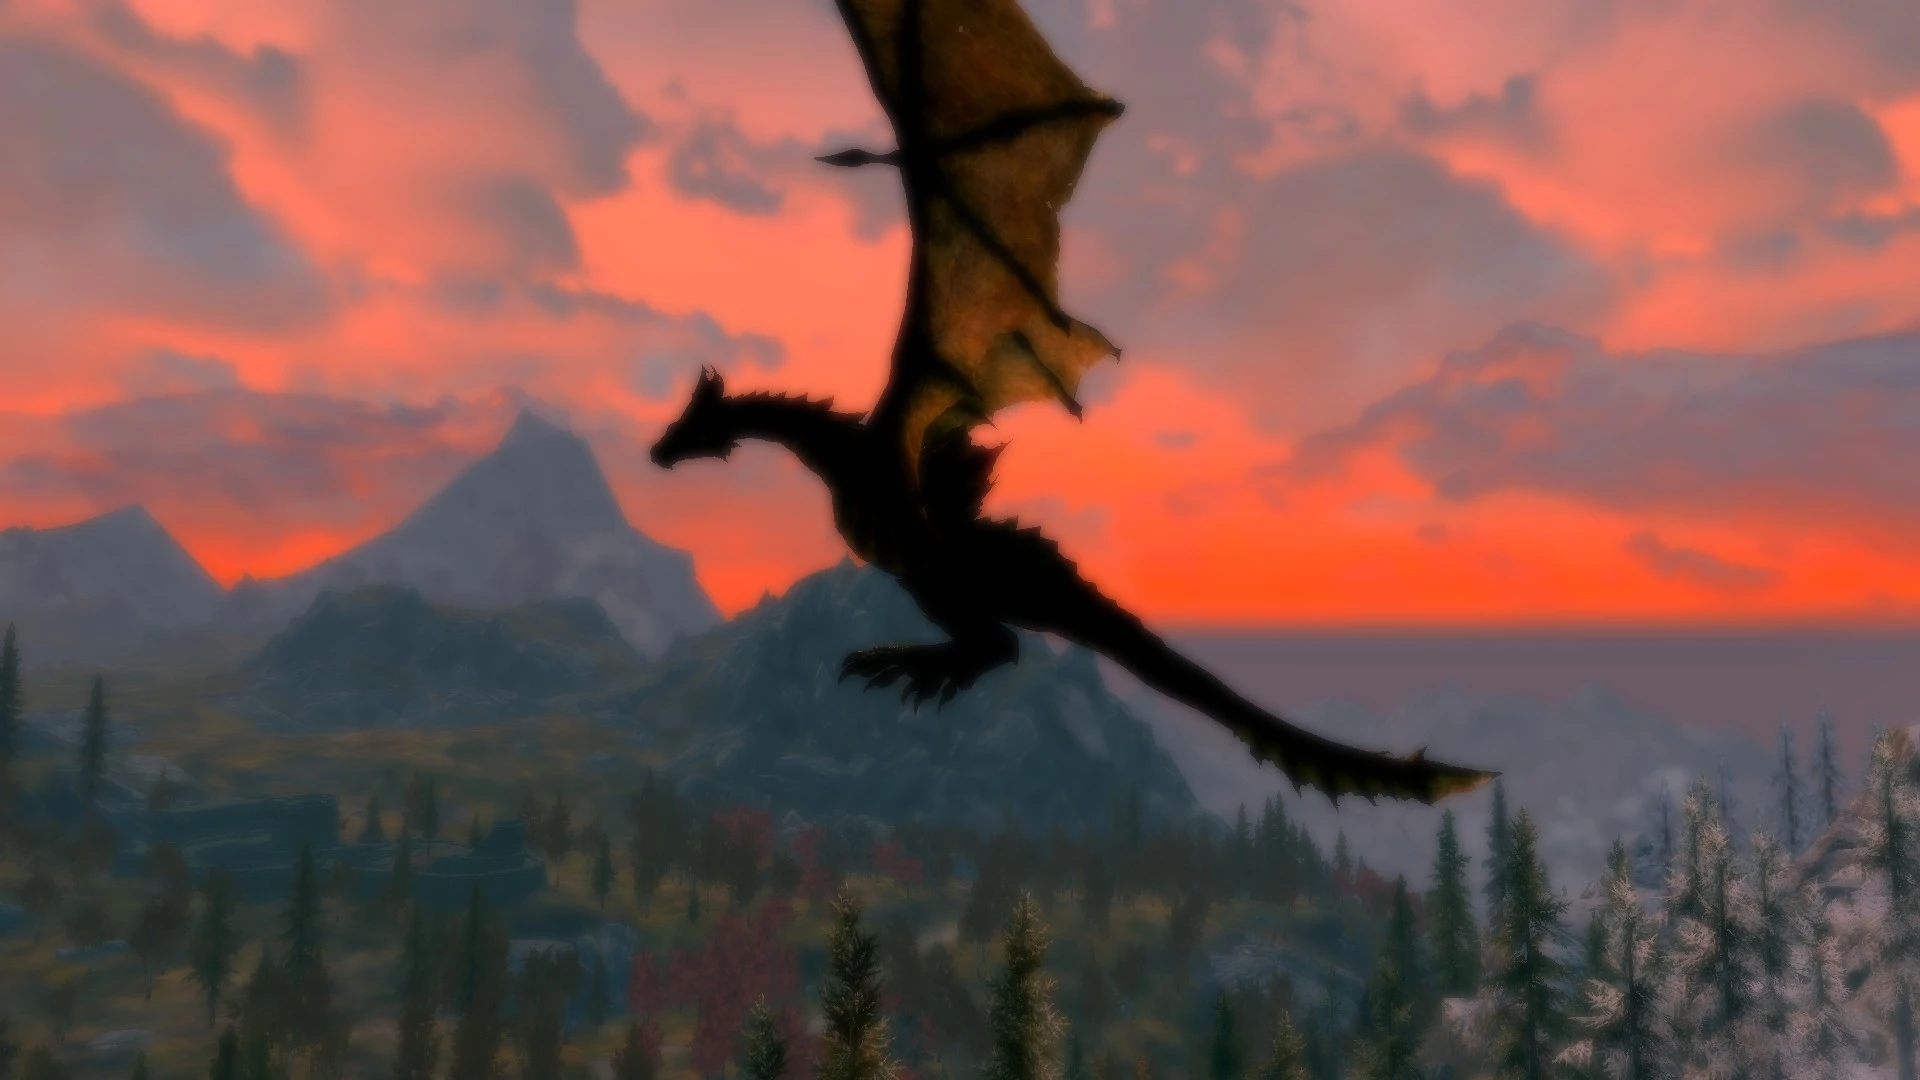 free Drekirokr - Dusk of the Dragon for iphone download